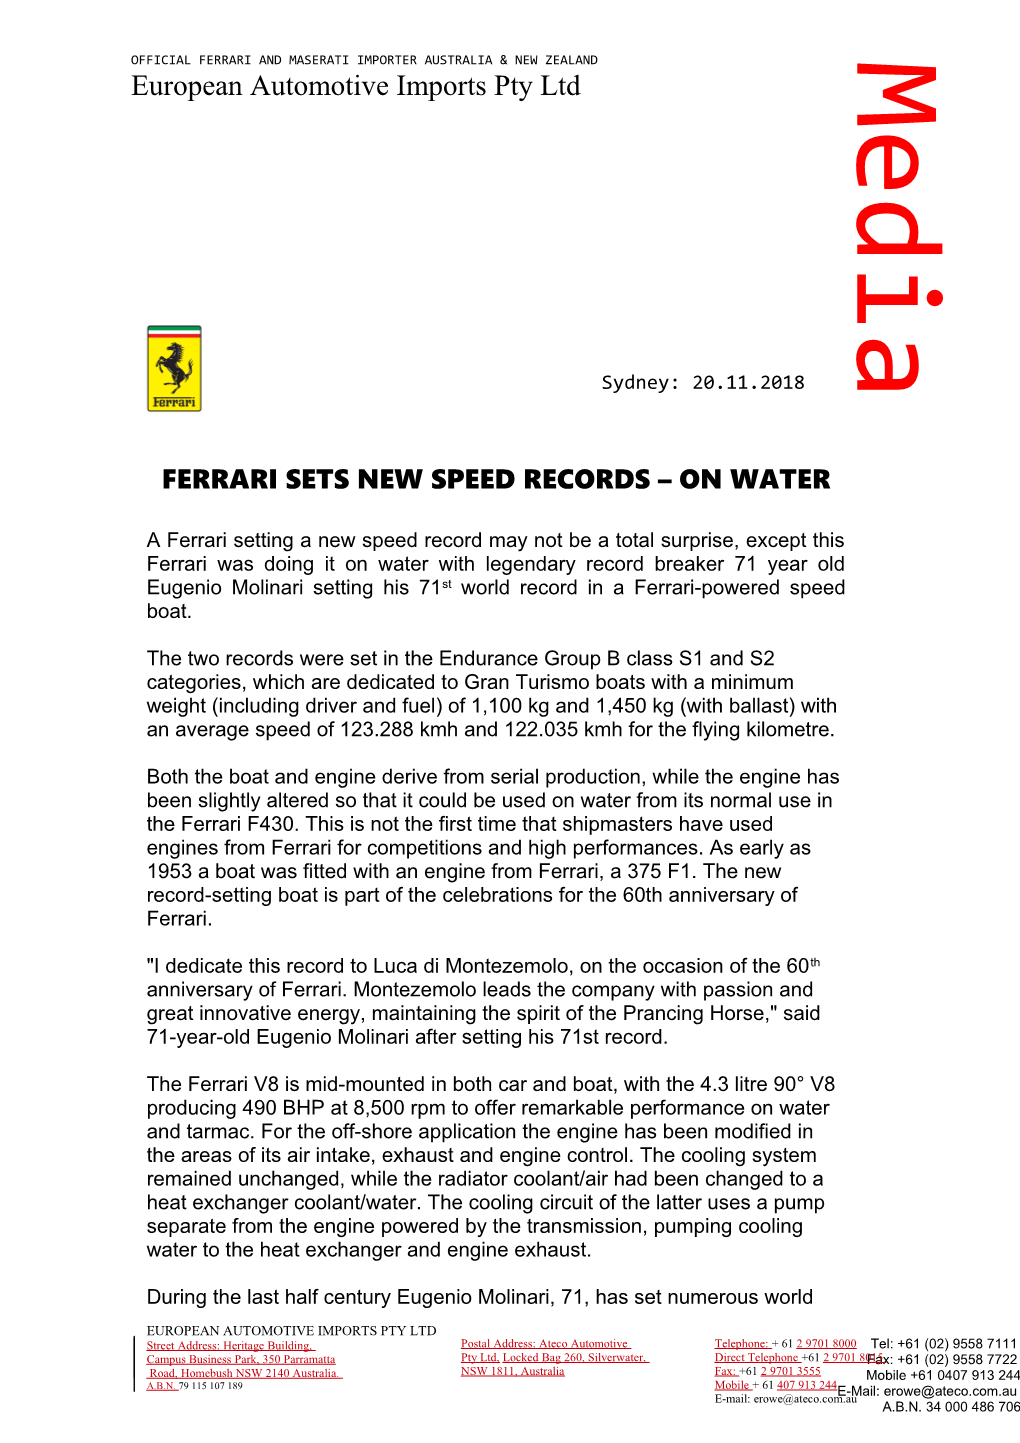 Ferrari Sets New Speed Records on Water